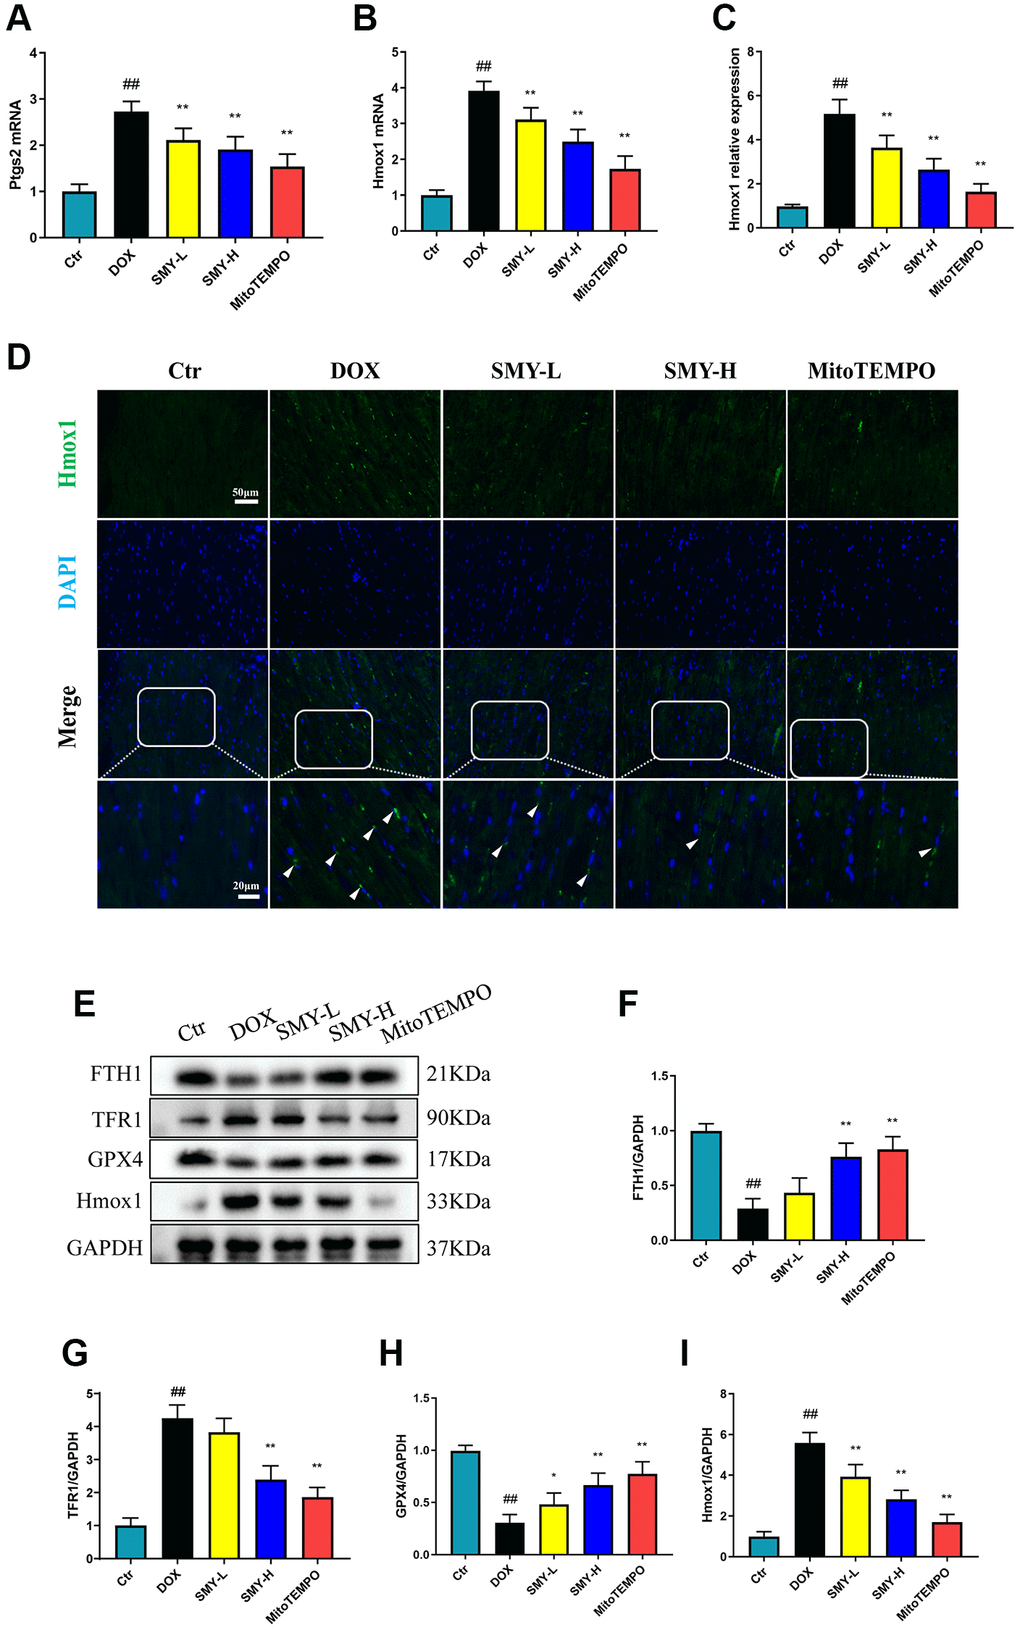 The effect of SMY on molecular markers of ferroptosis. (A, B) Ptgs2 mRNA (A) and Hmox1 mRNA (B) levels were measured by qPCR. (C) Quantification of the intensity of immunofluorescence of Hmox1. (D) Representative images of immunofluorescence of Hmox1. The green fluorescence represented Hmox1 and the blue fluorescence indicated cell nucleus. (E) Representative blot images of FTH1, TFR1, GPX4, and Hmox1 protein levels. (F) Analysis of FTH1 protein levels by column graph, adjusted by GAPDH. (G) Analysis of TFR1 protein levels by column graph, adjusted by GAPDH. (H) Analysis of GPX4 protein levels by column graph, adjusted by GAPDH. (I) Analysis of Hmox1 protein levels by column graph, adjusted by GAPDH. The results were presented as mean ± SEM. ##means compared with control group, P *means compared with DOX group, P **means compared with DOX group, P 